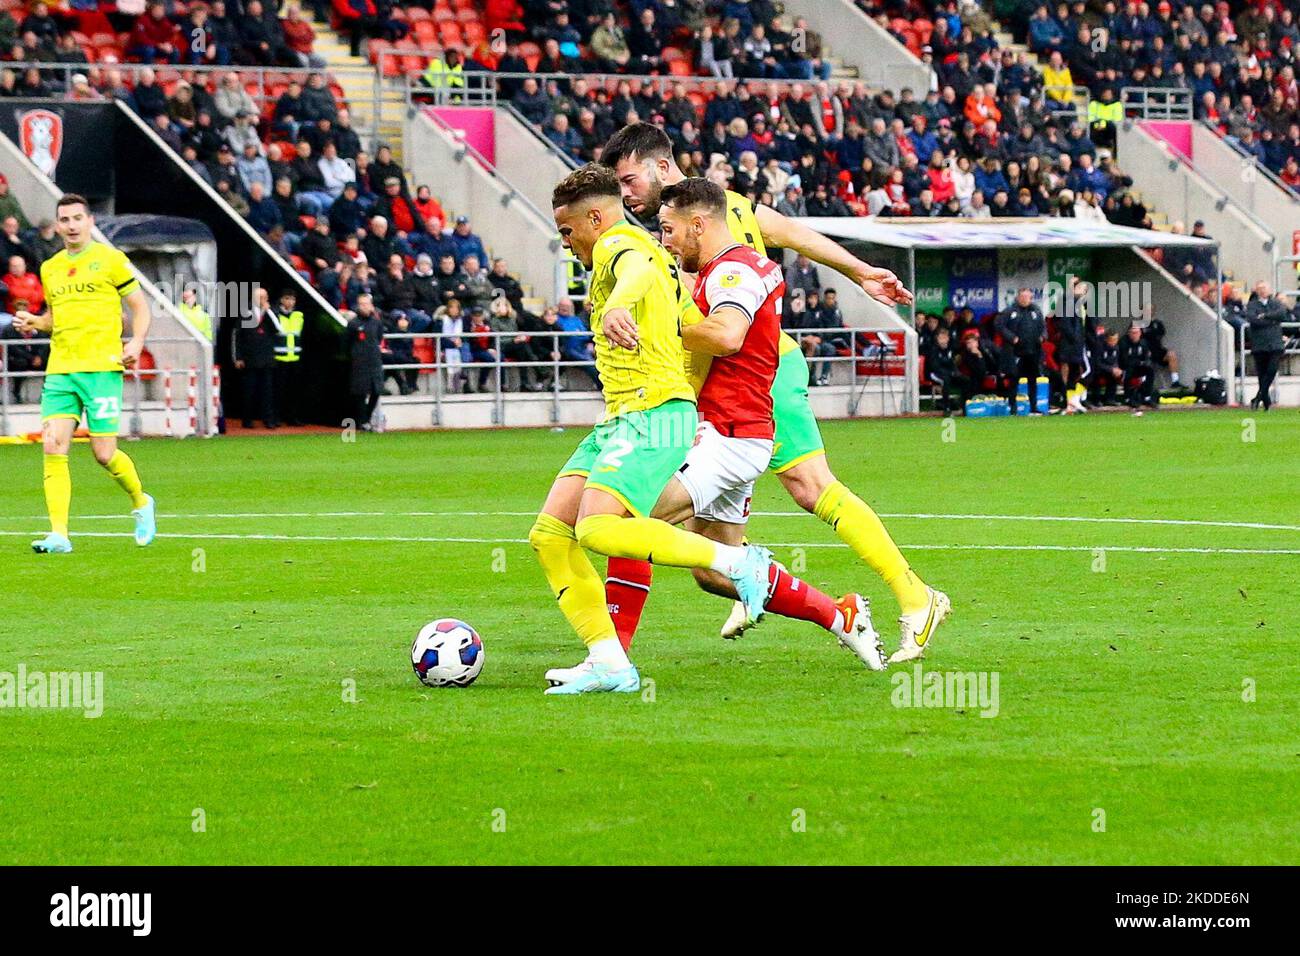 AESSEAL New York Stadium, Rotherham, England - 5th November 2022 Conor Washington (14) of Rotherham United being shut out by Max Aarons (2) and Grant Hanley (5) of Norwich City - during the game Rotherham v Norwich City, Sky Bet Championship,  2022/23, AESSEAL New York Stadium, Rotherham, England - 5th November 2022 Credit: Arthur Haigh/WhiteRosePhotos/Alamy Live News Stock Photo